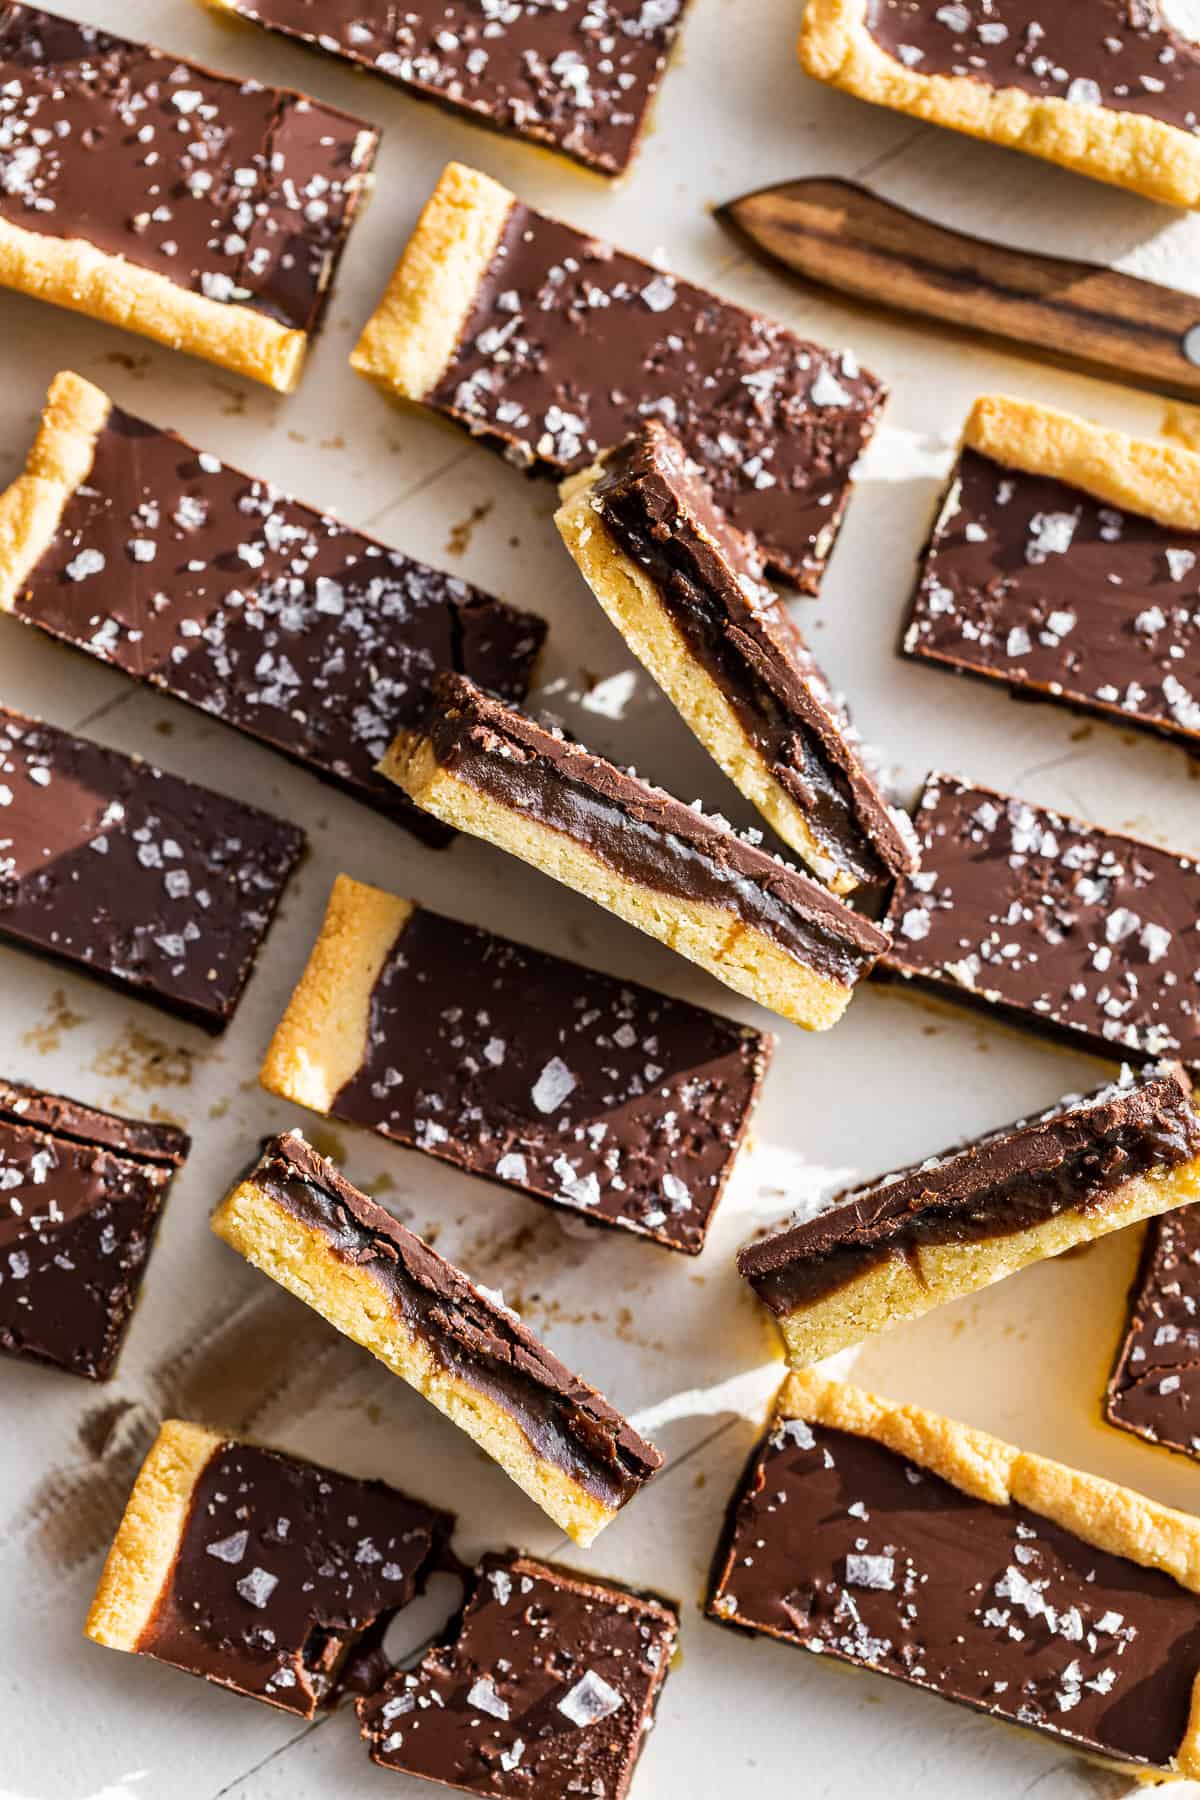 Paleo Twix Bars on a white background with some turned sideways showing the caramel filling.